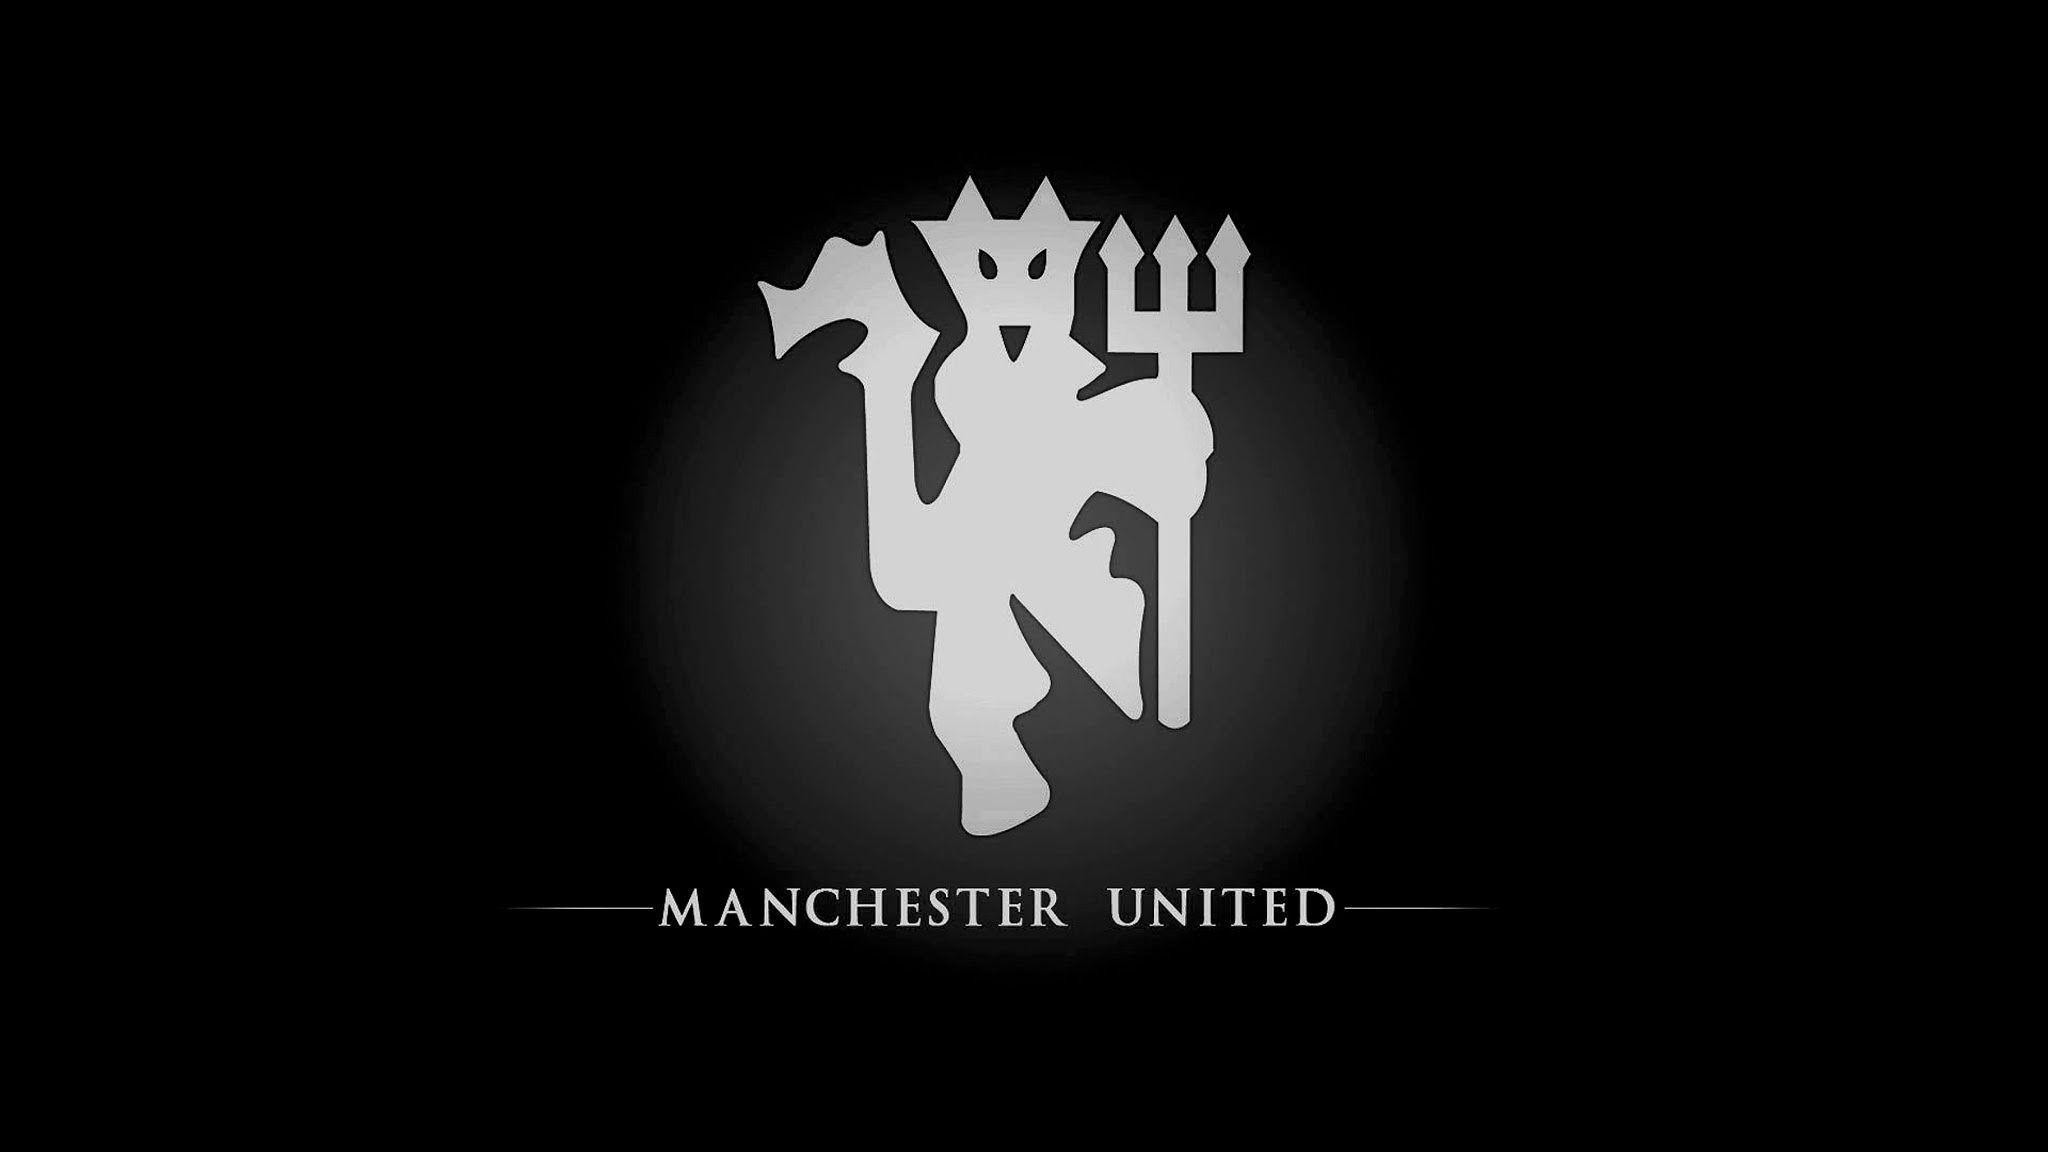 2048x1152 Sports Wallpaper: Manchester United Black Wallpapers Free HD .